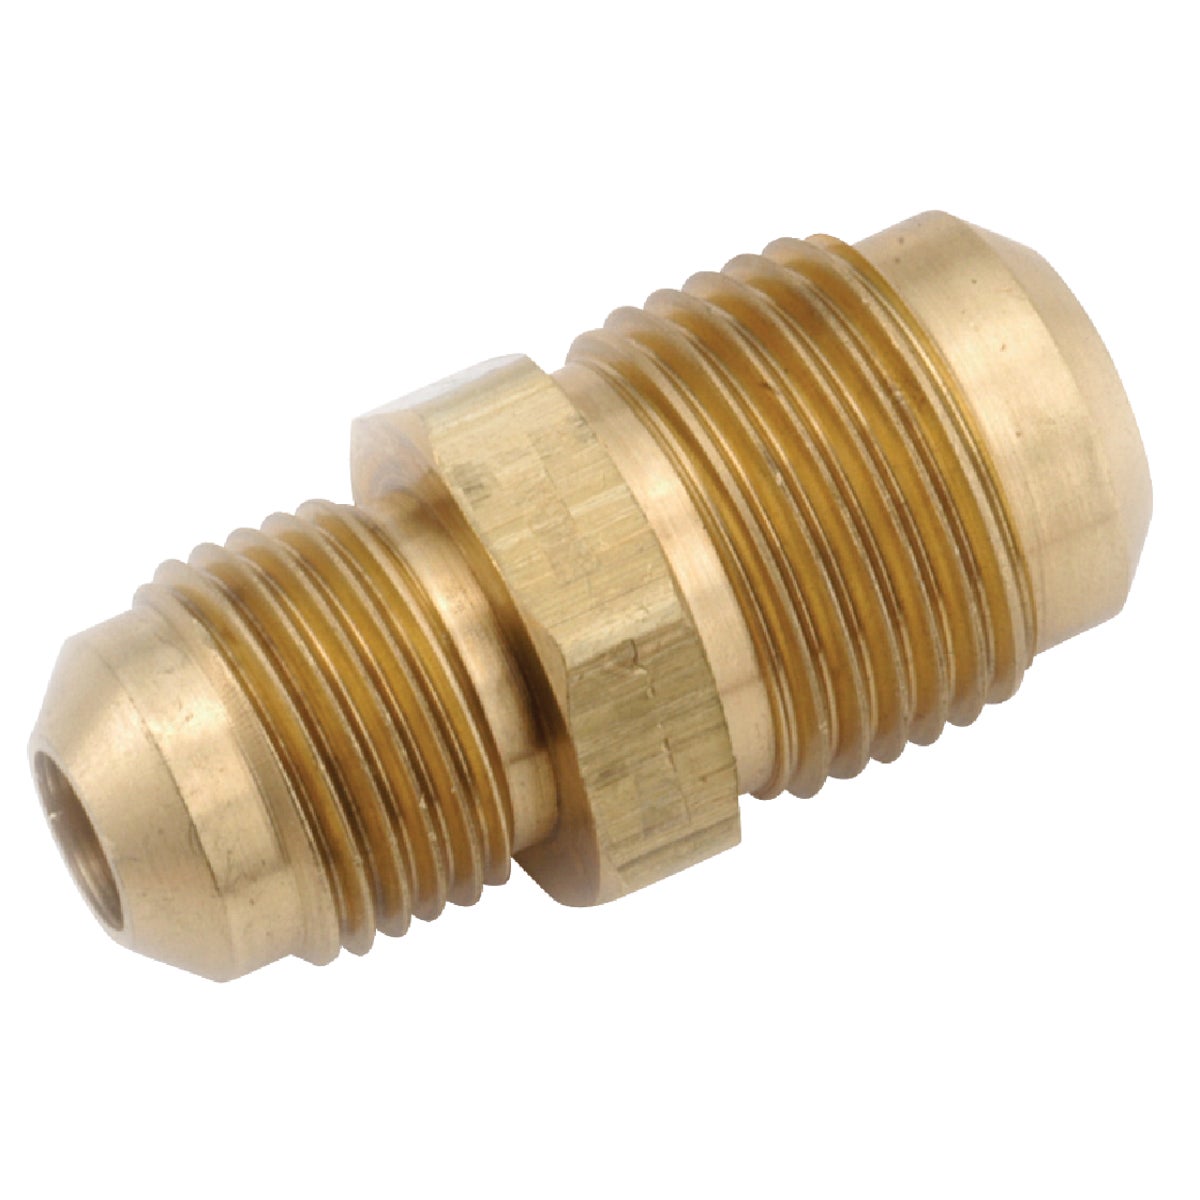 Anderson Metals 5/8 In. x 3/8 In. Brass Low Lead Low Lead Reducing Flare Union